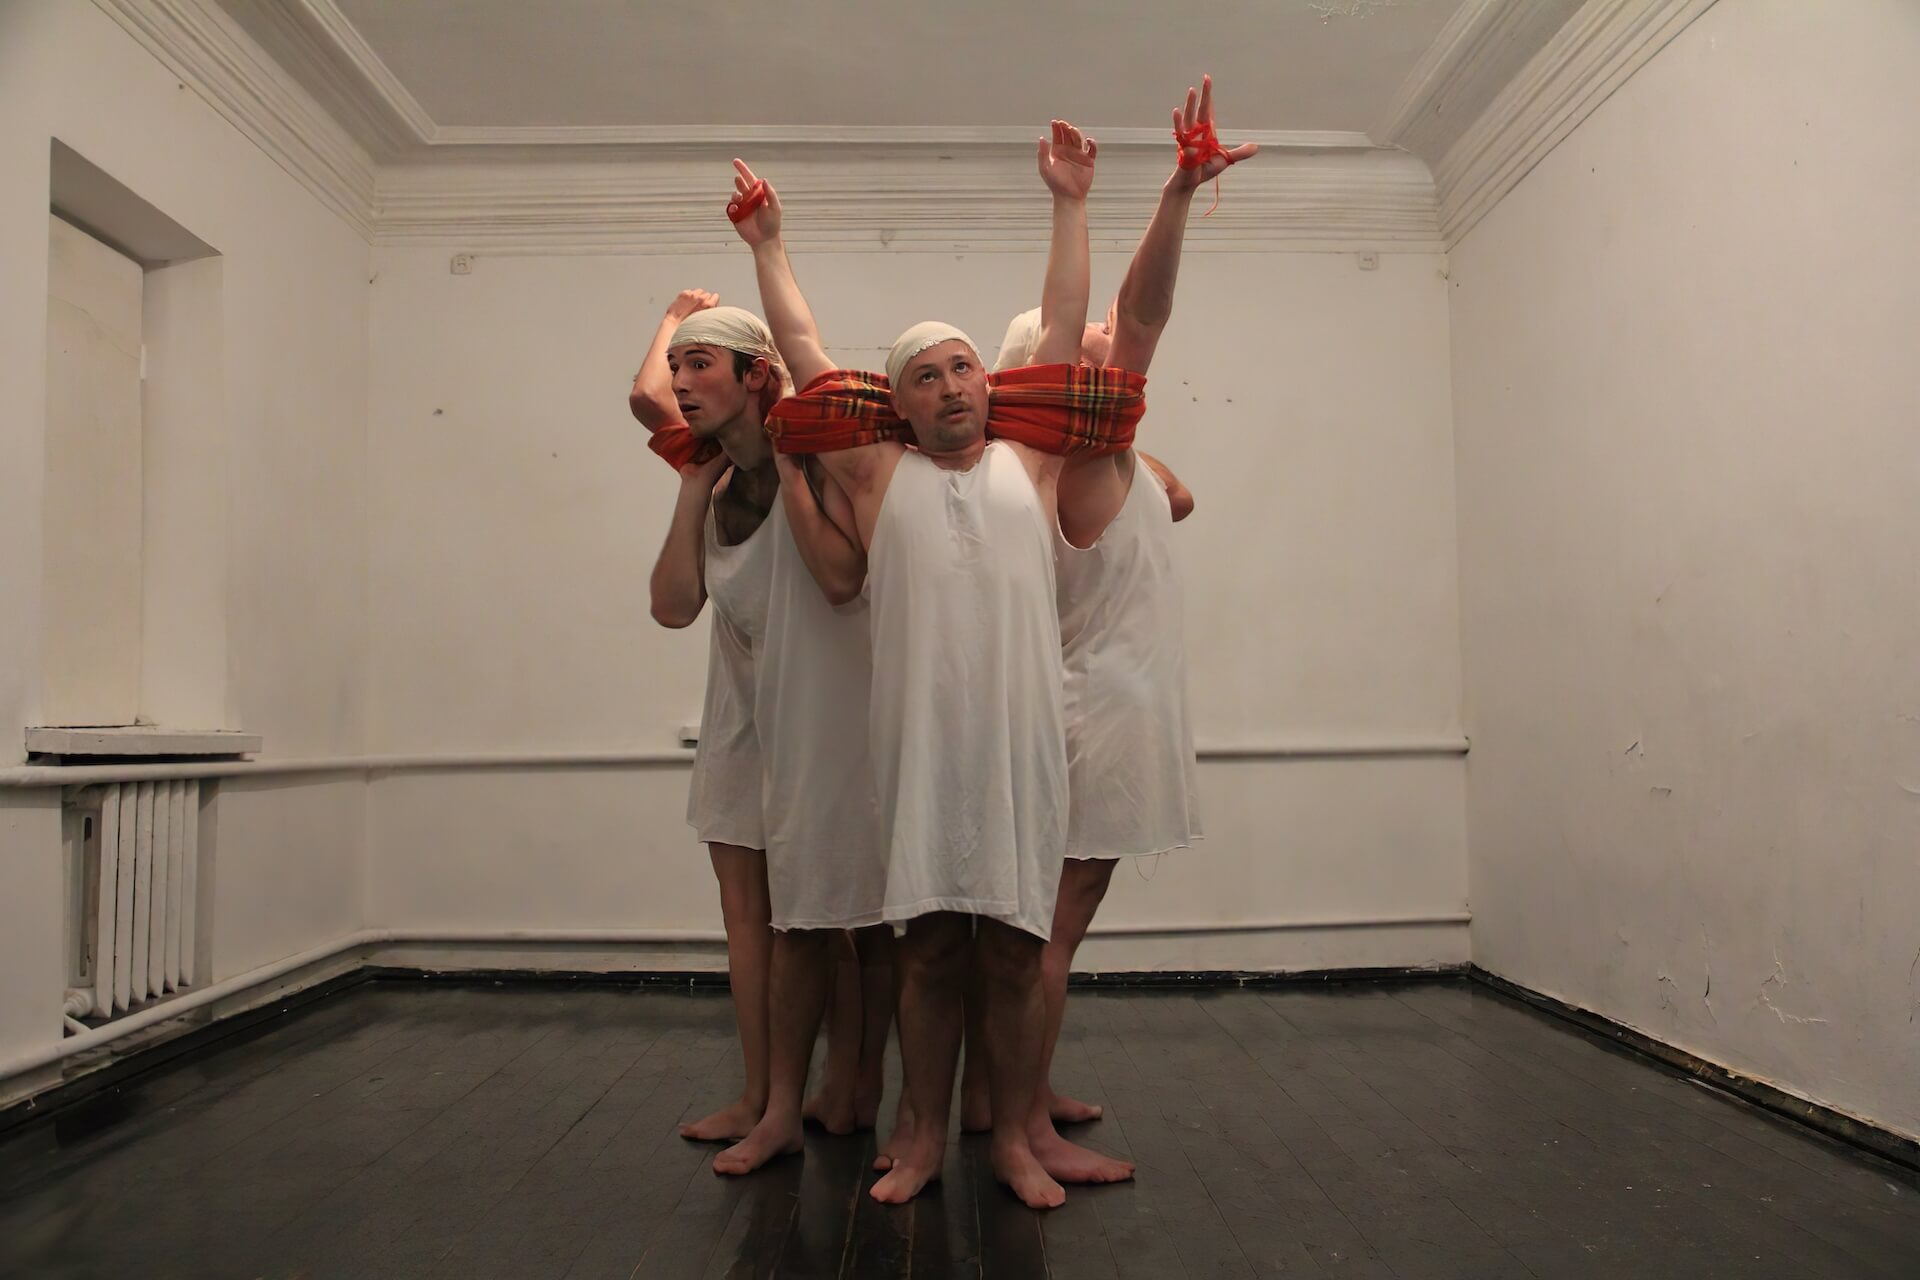 Five performers wrapping themselves with red blankets with their arms up